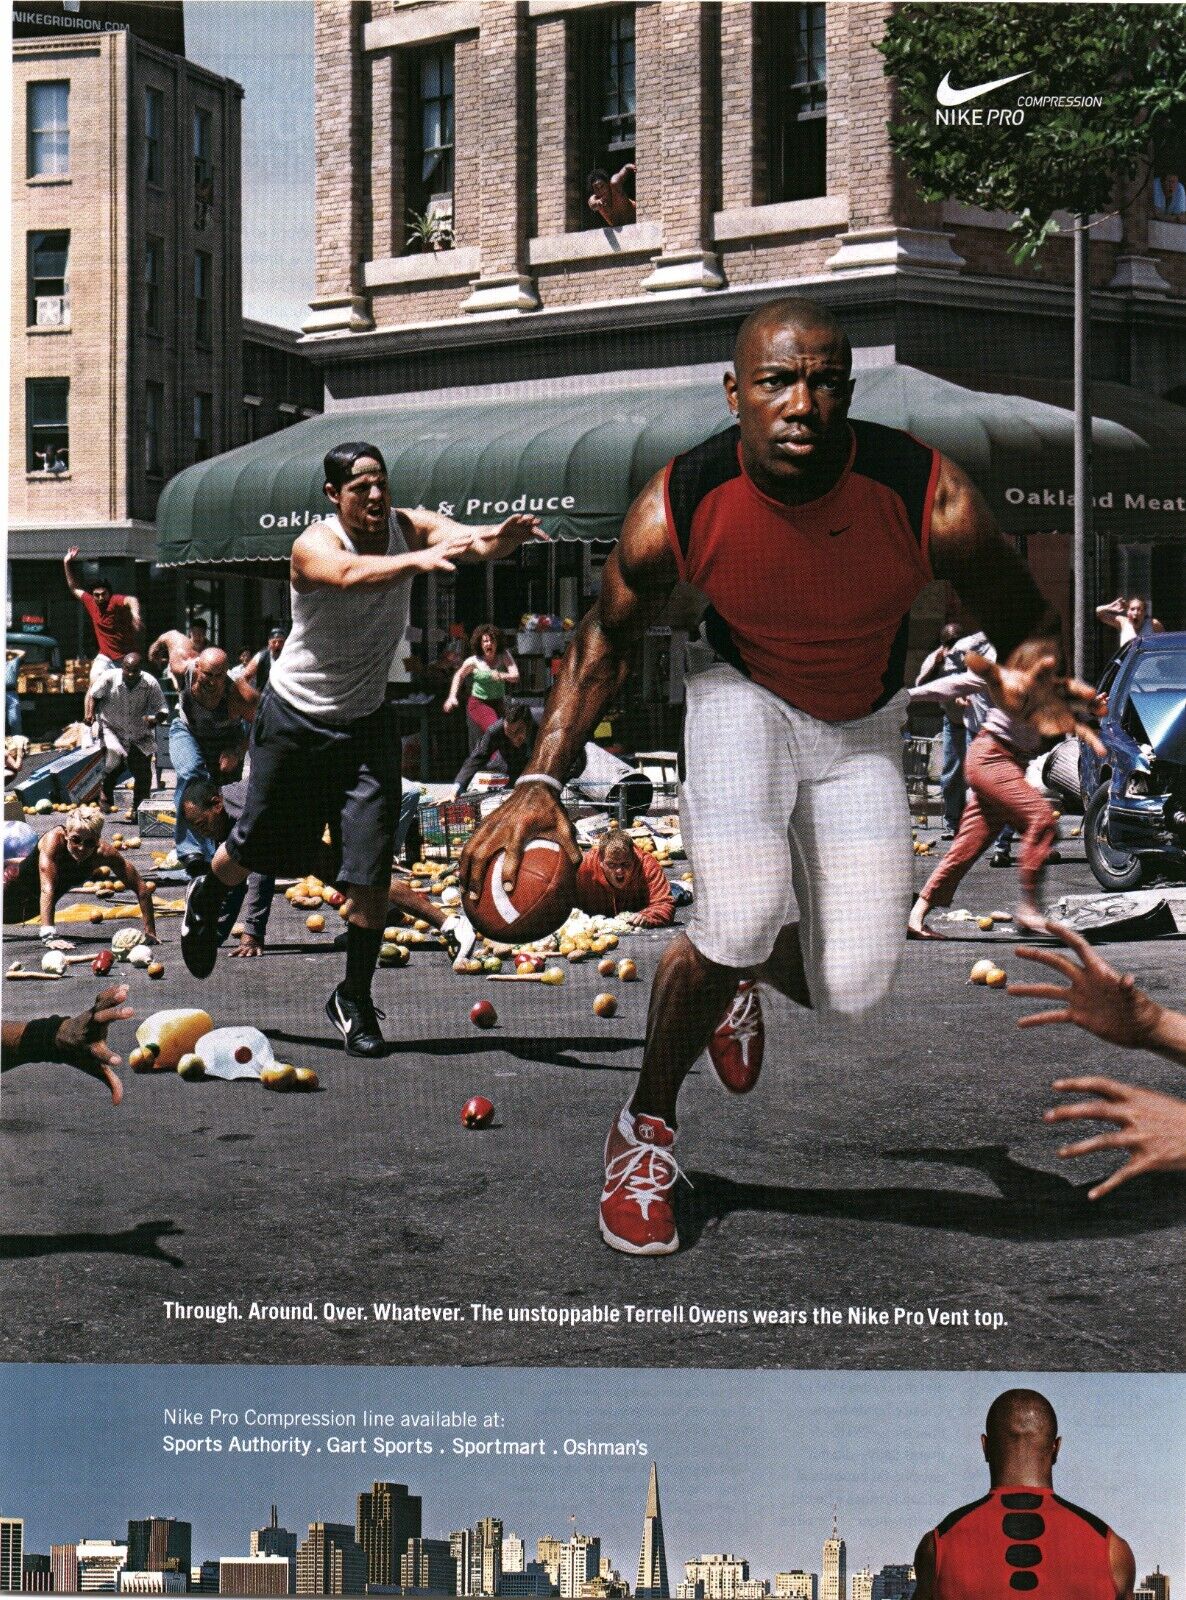 2004 PRINT AD - NIKE - NIKE PRO COMPRESSION AD - TERRELL OWENS TO OAKLAND